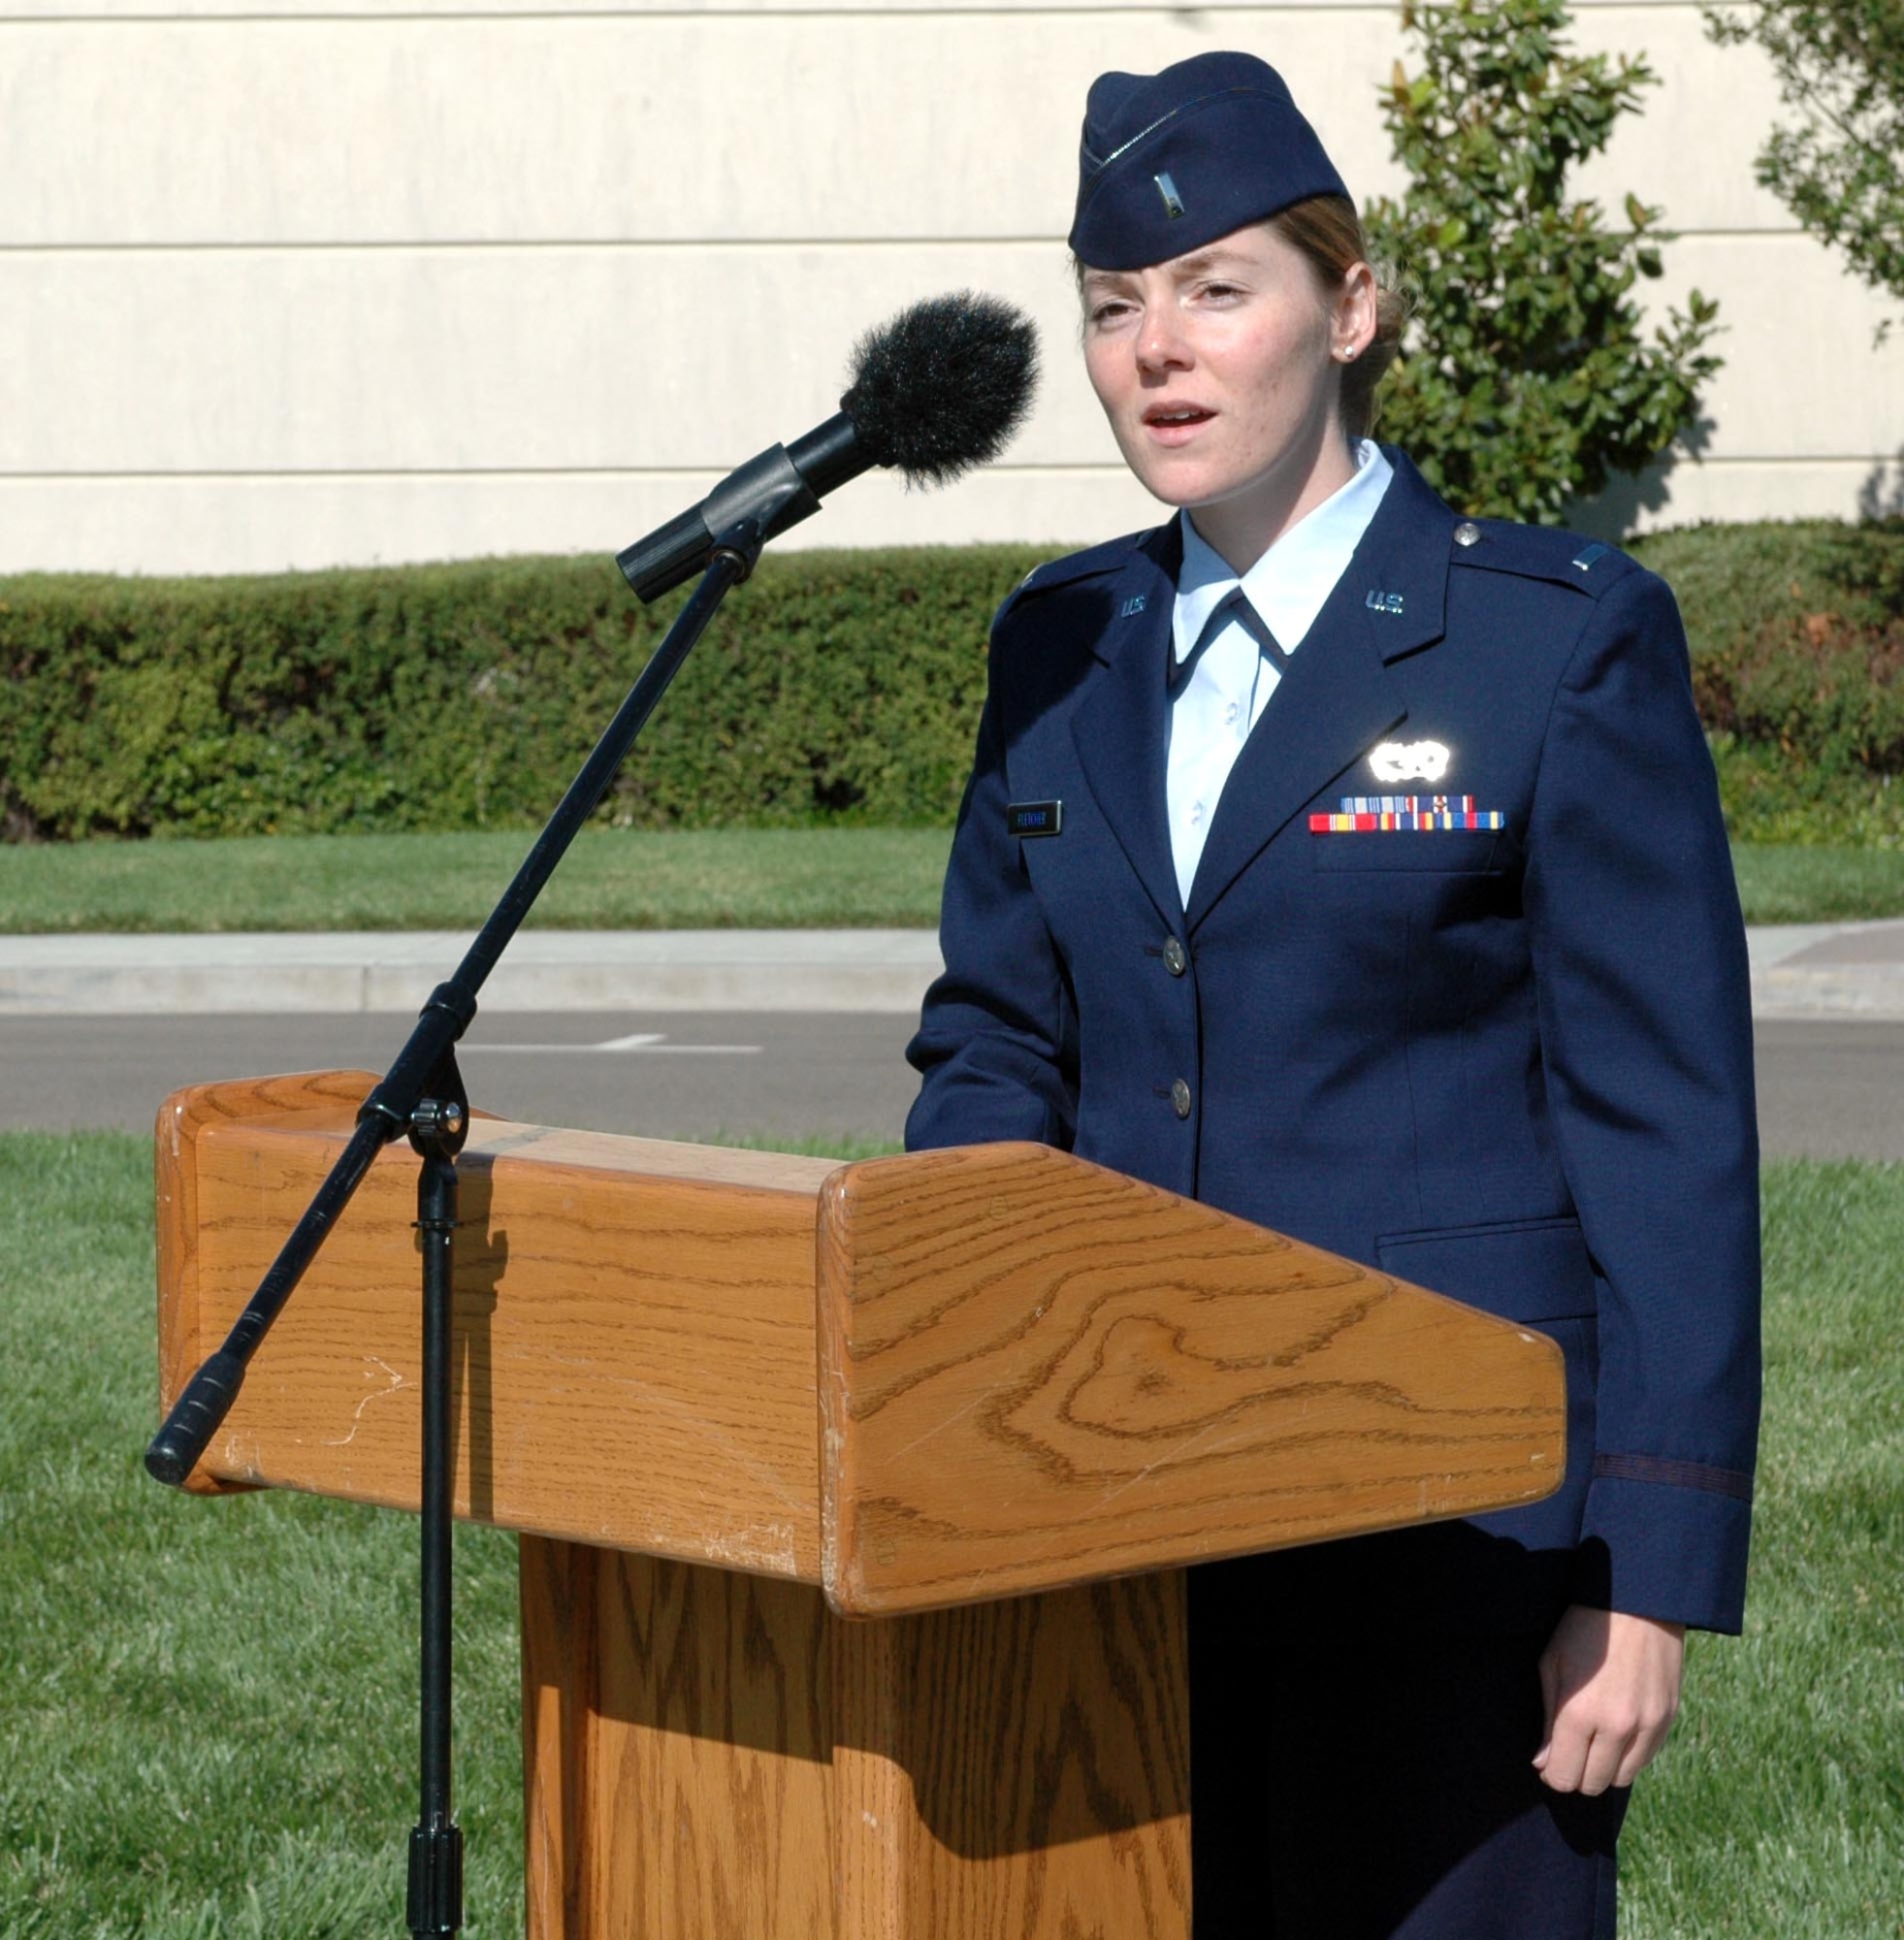 1st Lt. Meghann Fletcher, 60th Mission Support Group, performs a rendition of "America the Beautiful," during Team Travis' Sept. 11 Remembrance ceremony and retreat. (U.S. Air Force photo/Staff Sgt. Candy Knight)